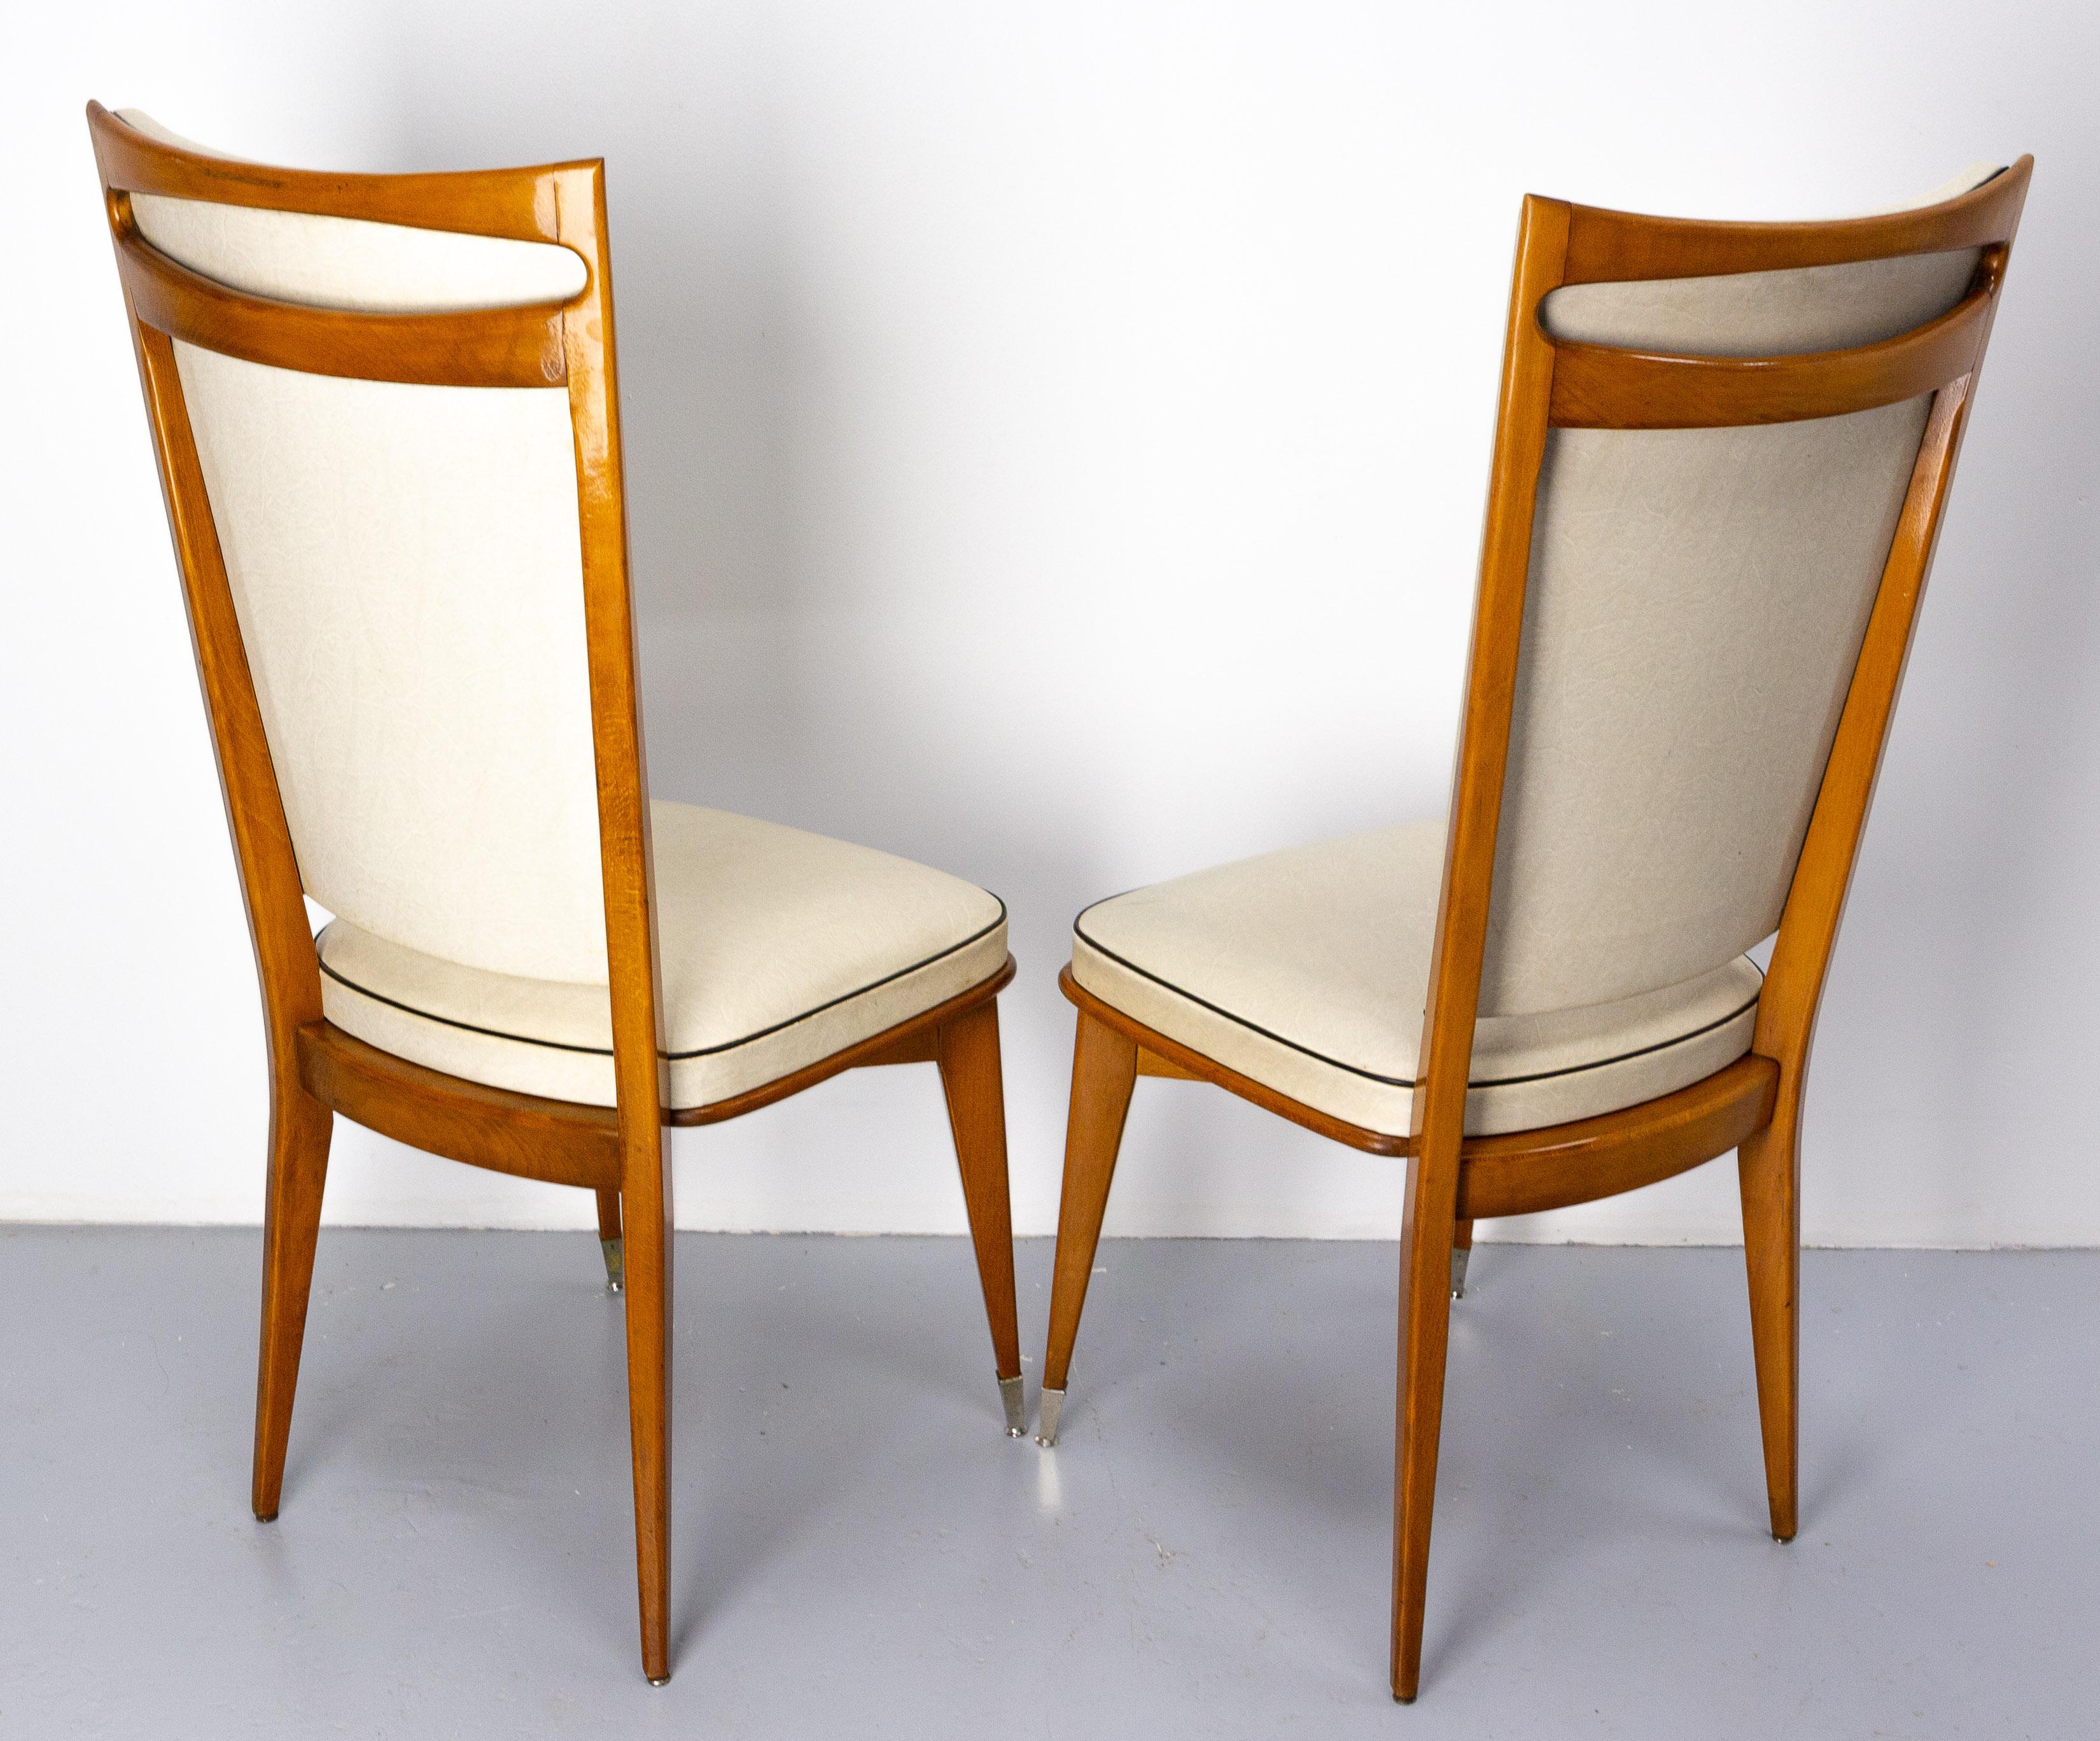 Six Dining Chairs Beech and Skai to Recover Midcentury French, circa 1950 For Sale 2